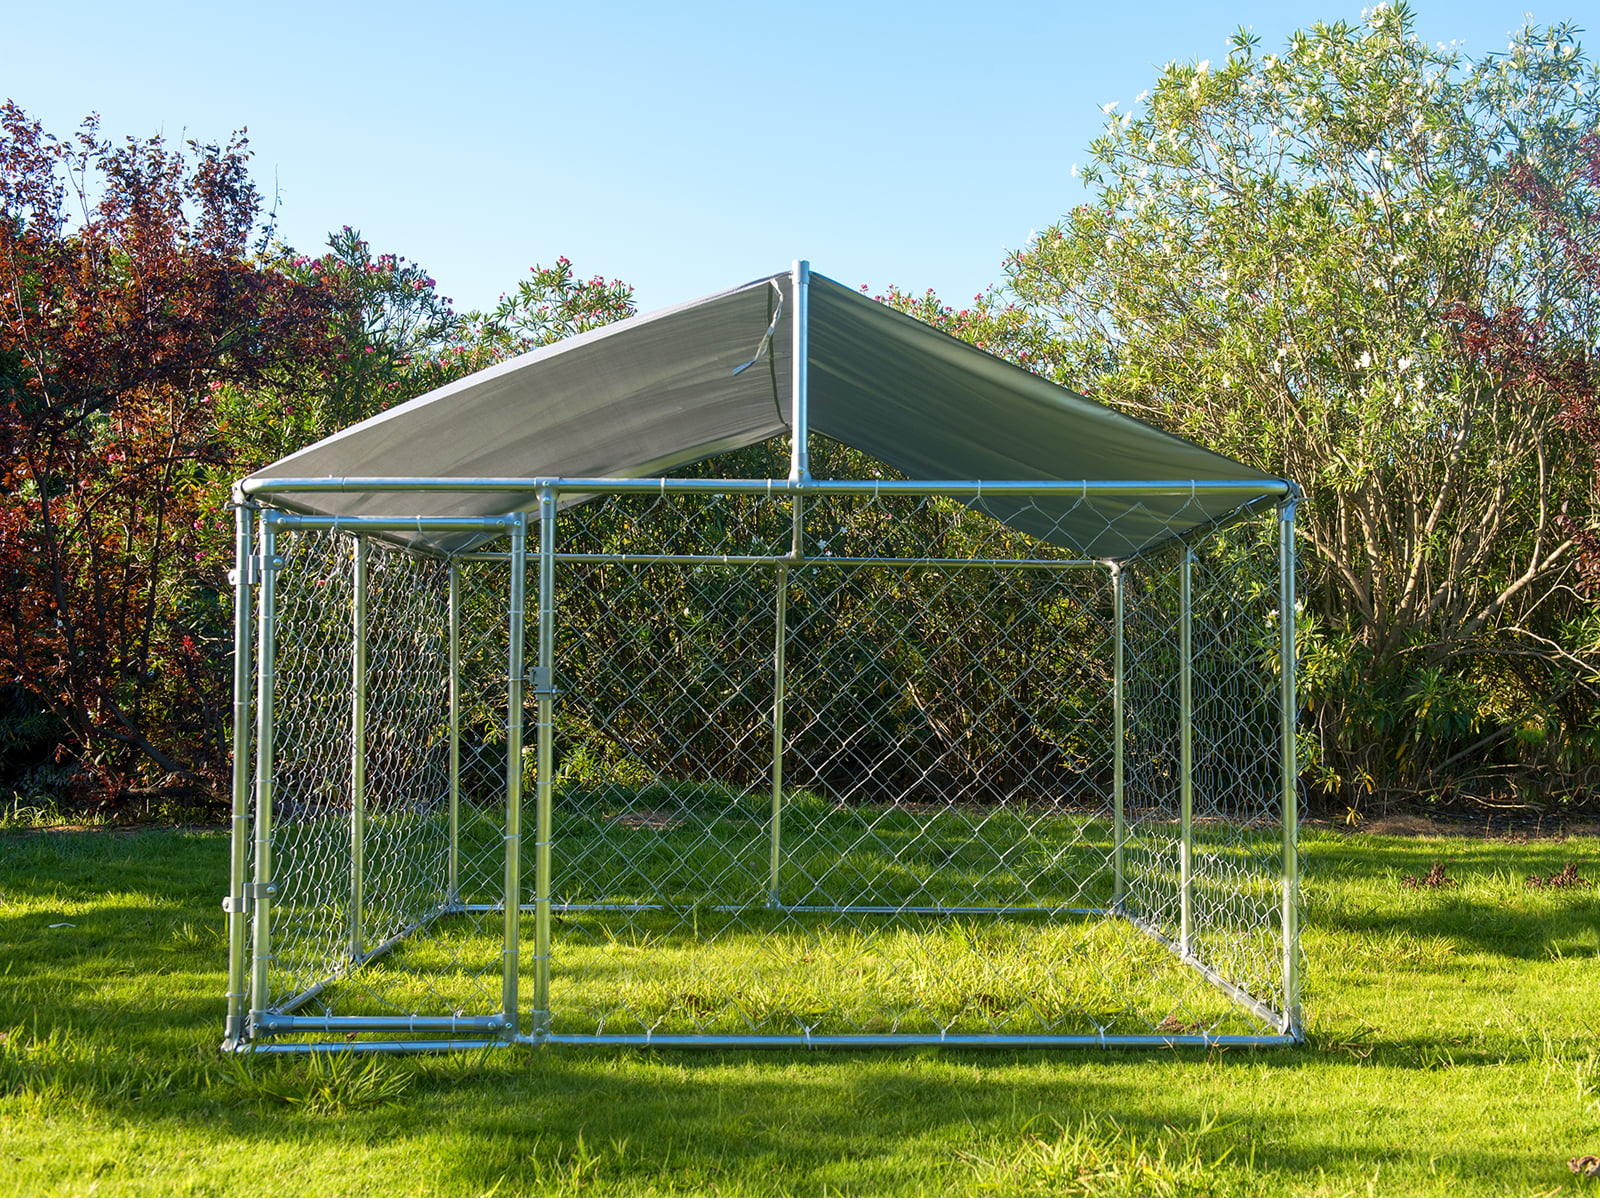 Magic Union 7.5'x 7.5'x 5.3' Large Outdoor Kennel Heavy Duty Dog Cage with Water -Resistant Cover